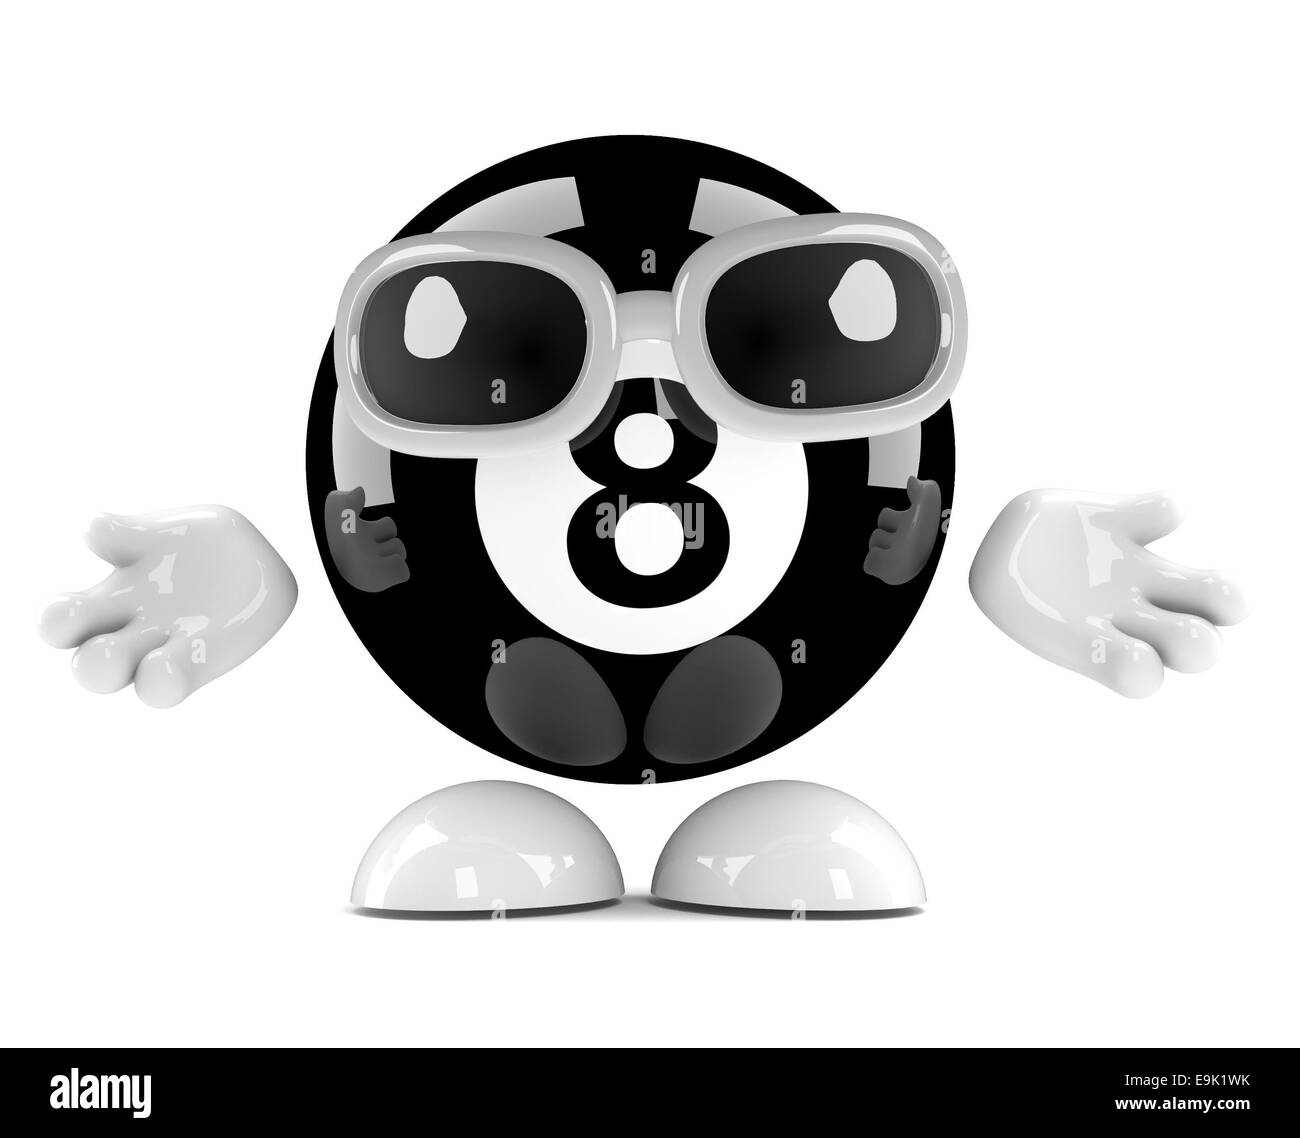 3d render of an 8 ball character shrugging Stock Photo